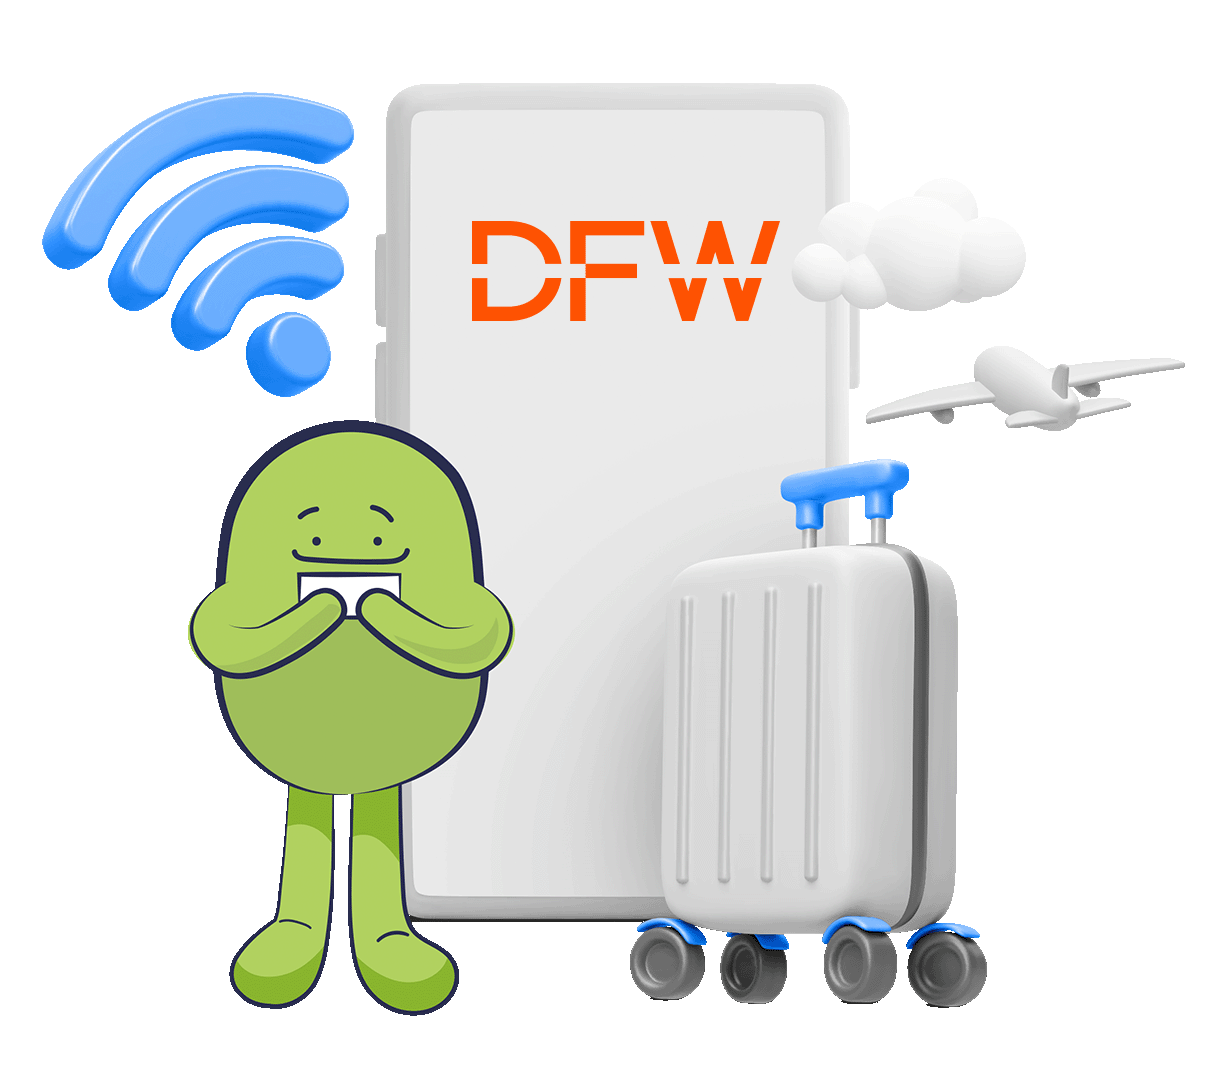 How to connect to DFW Airport WiFi